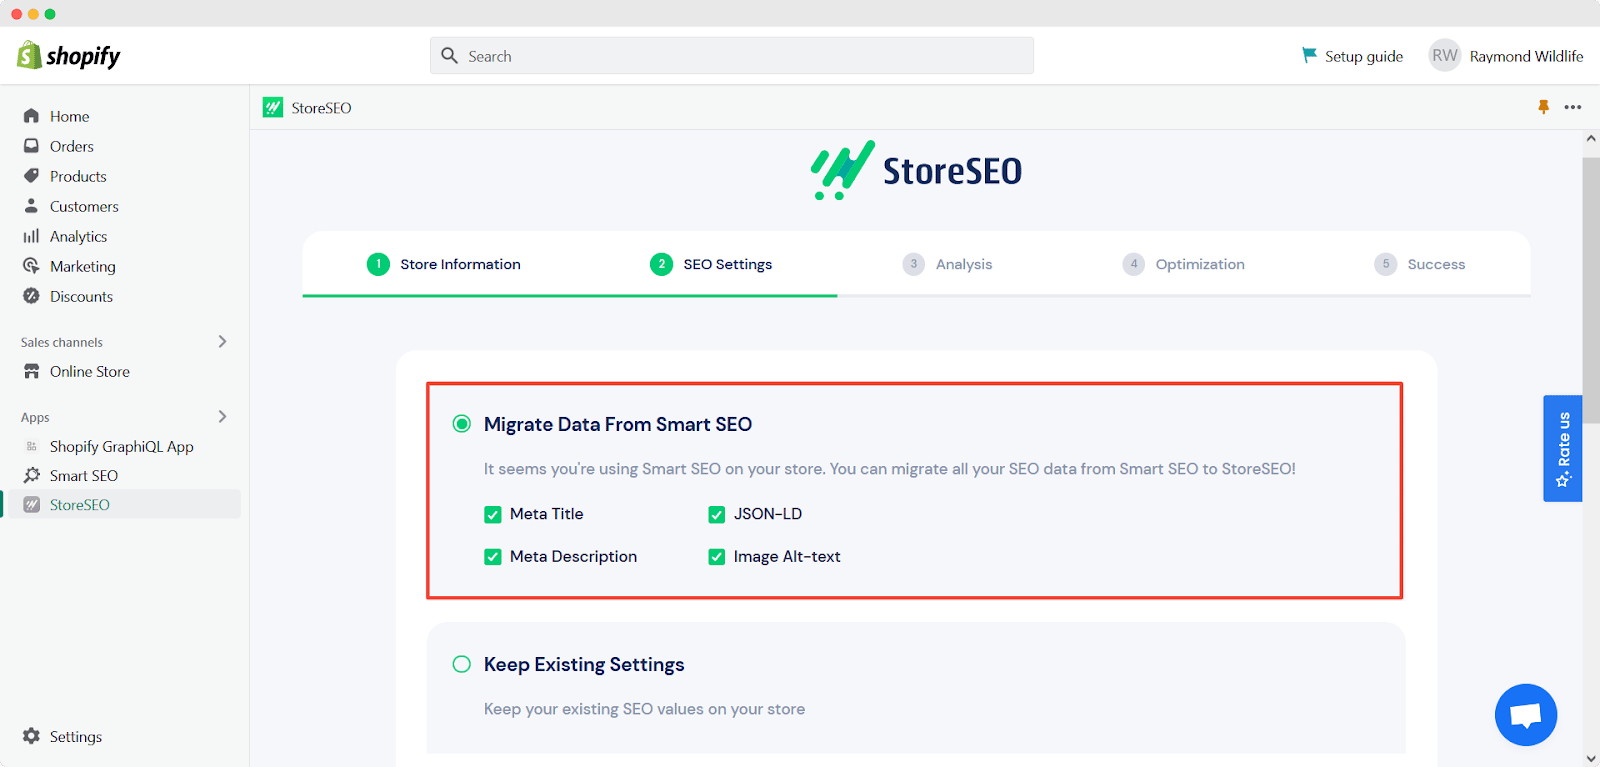 Migrate Data To StoreSEO